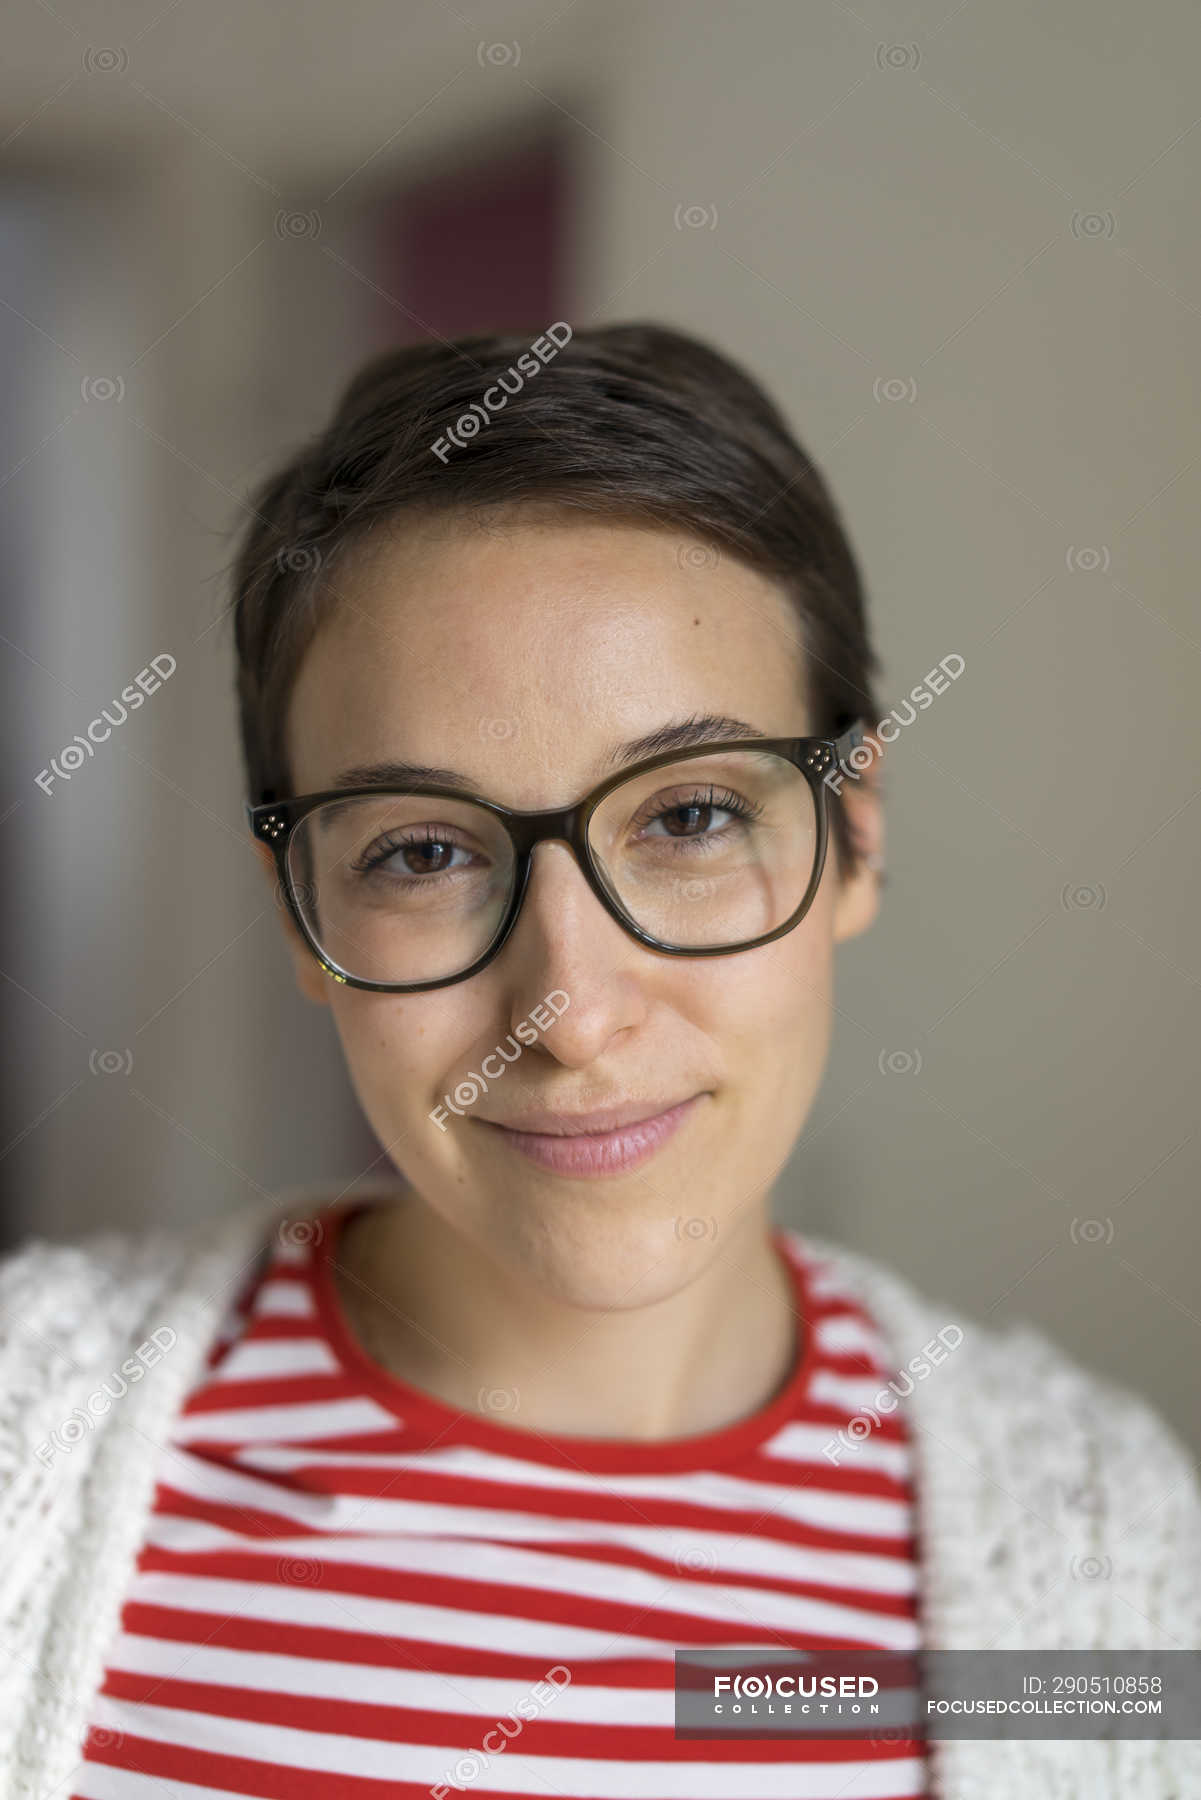 Portrait of a smiling young woman with short hair, wearing glasses — happy,  indoors - Stock Photo | #290510858